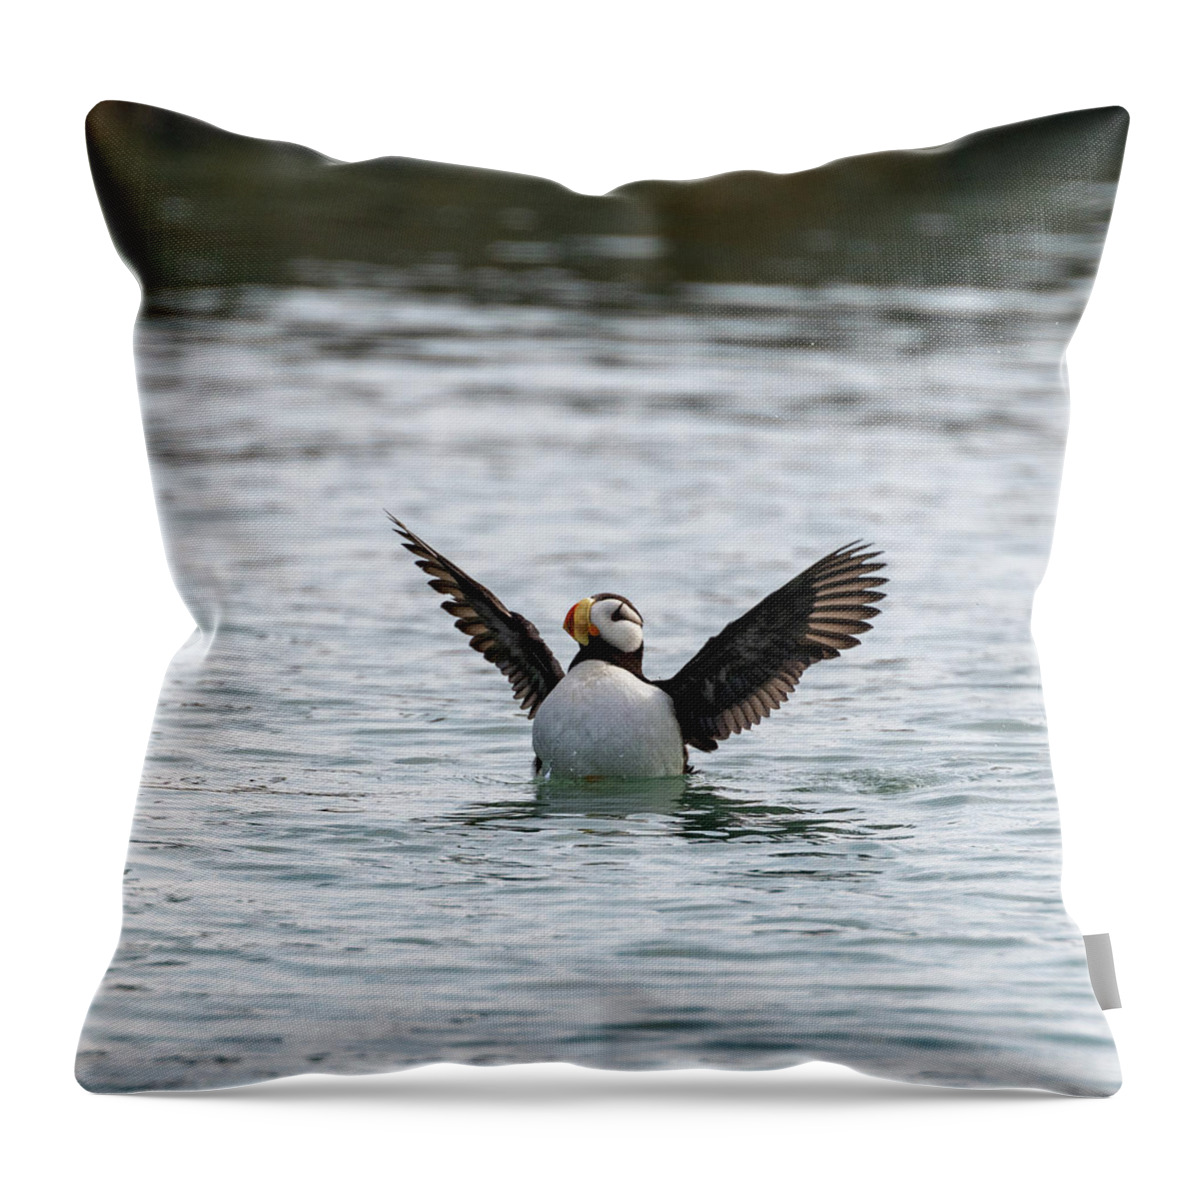 Puffin Throw Pillow featuring the photograph Drying Wings by Mark Hunter